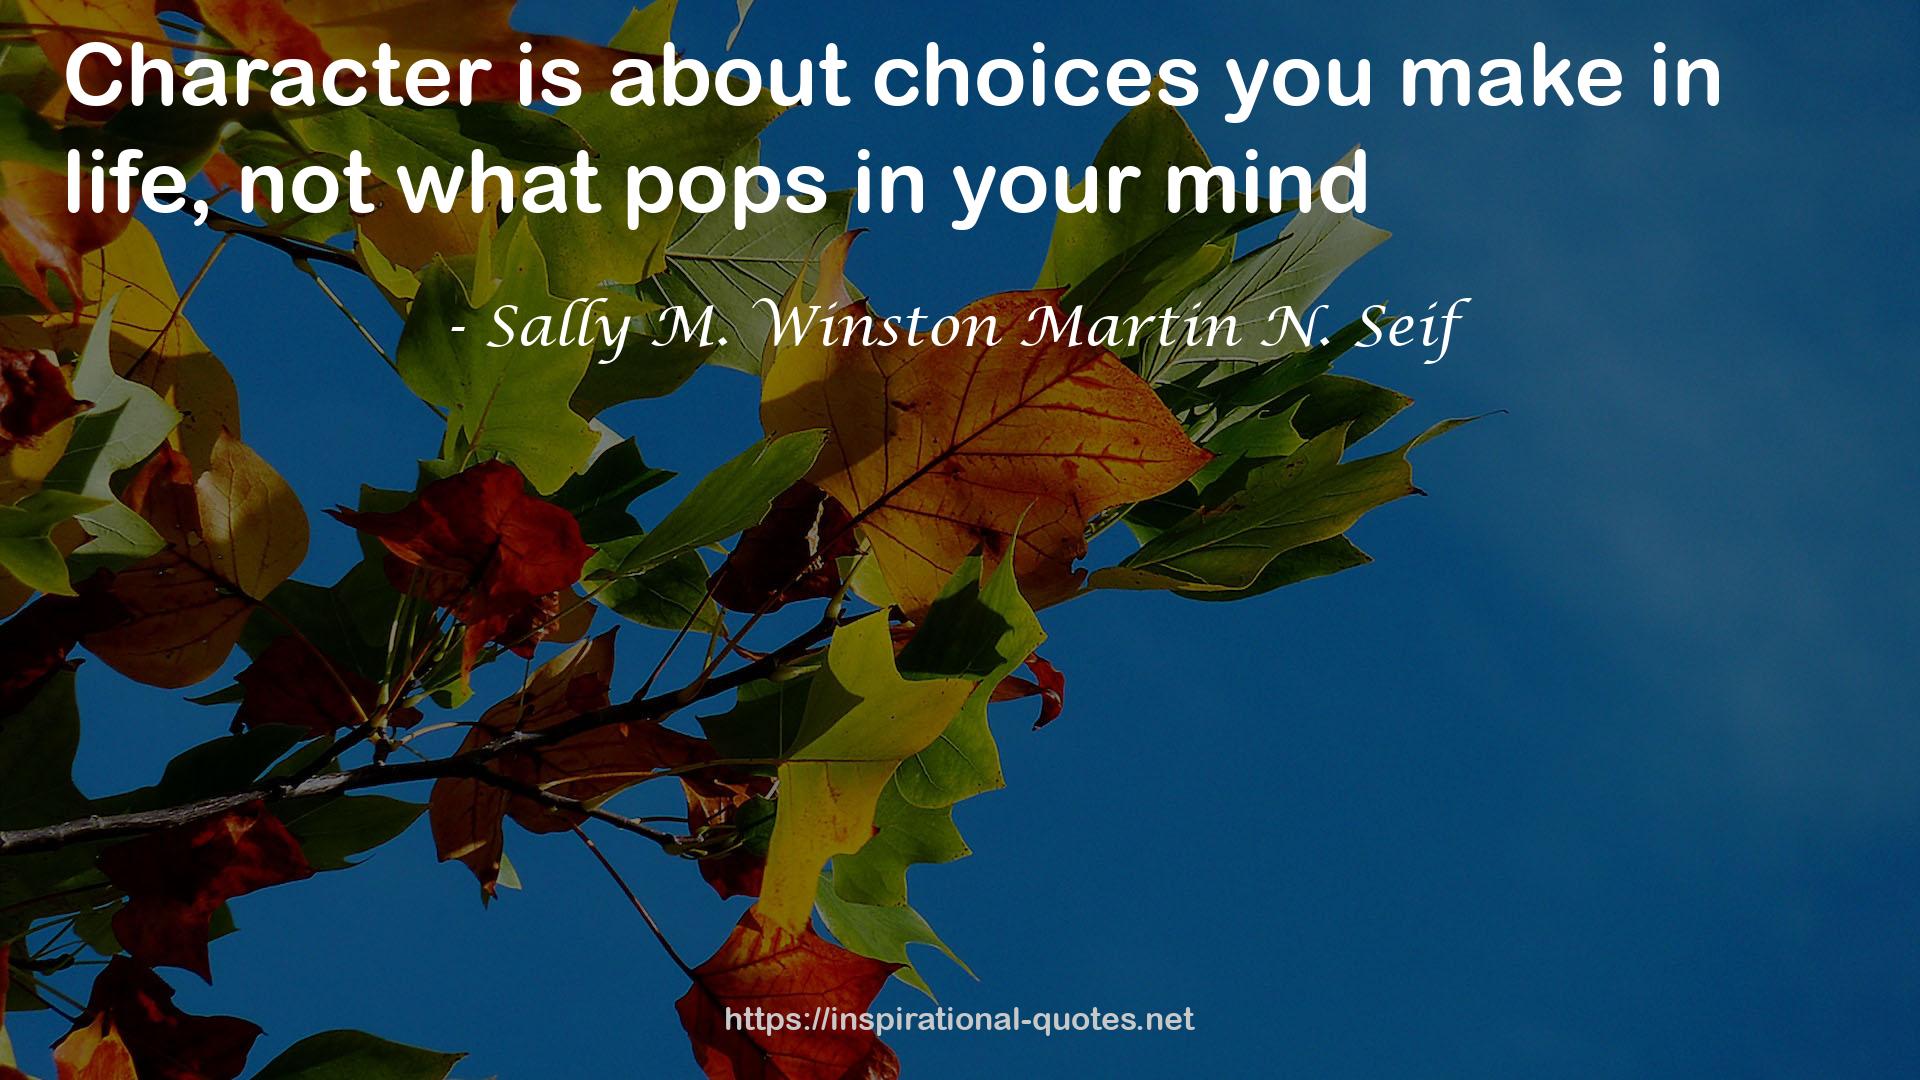 Sally M. Winston Martin N. Seif QUOTES